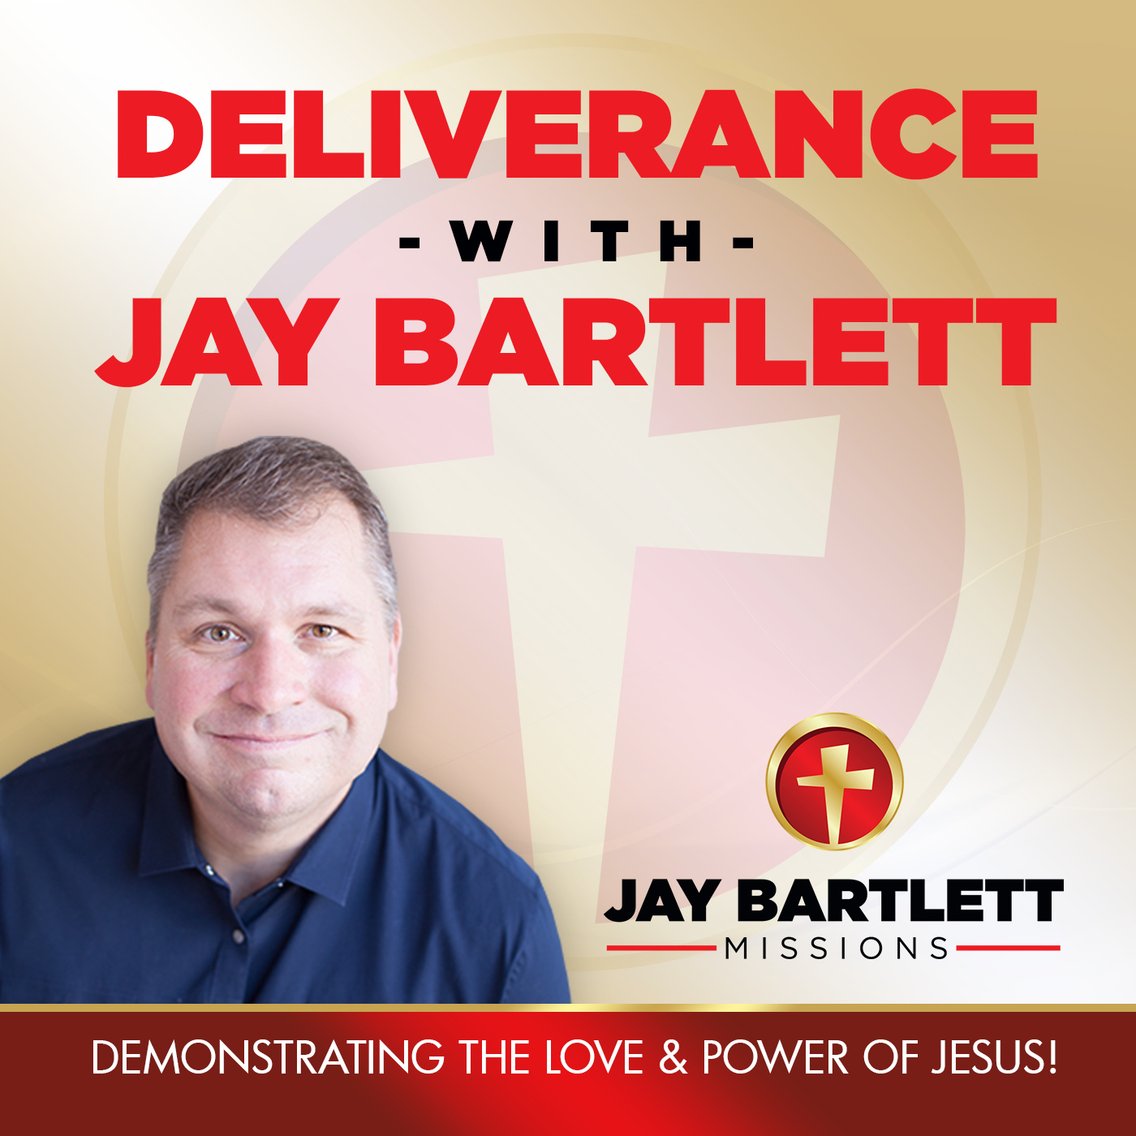 Deliverance with Jay Bartlett - Cover Image